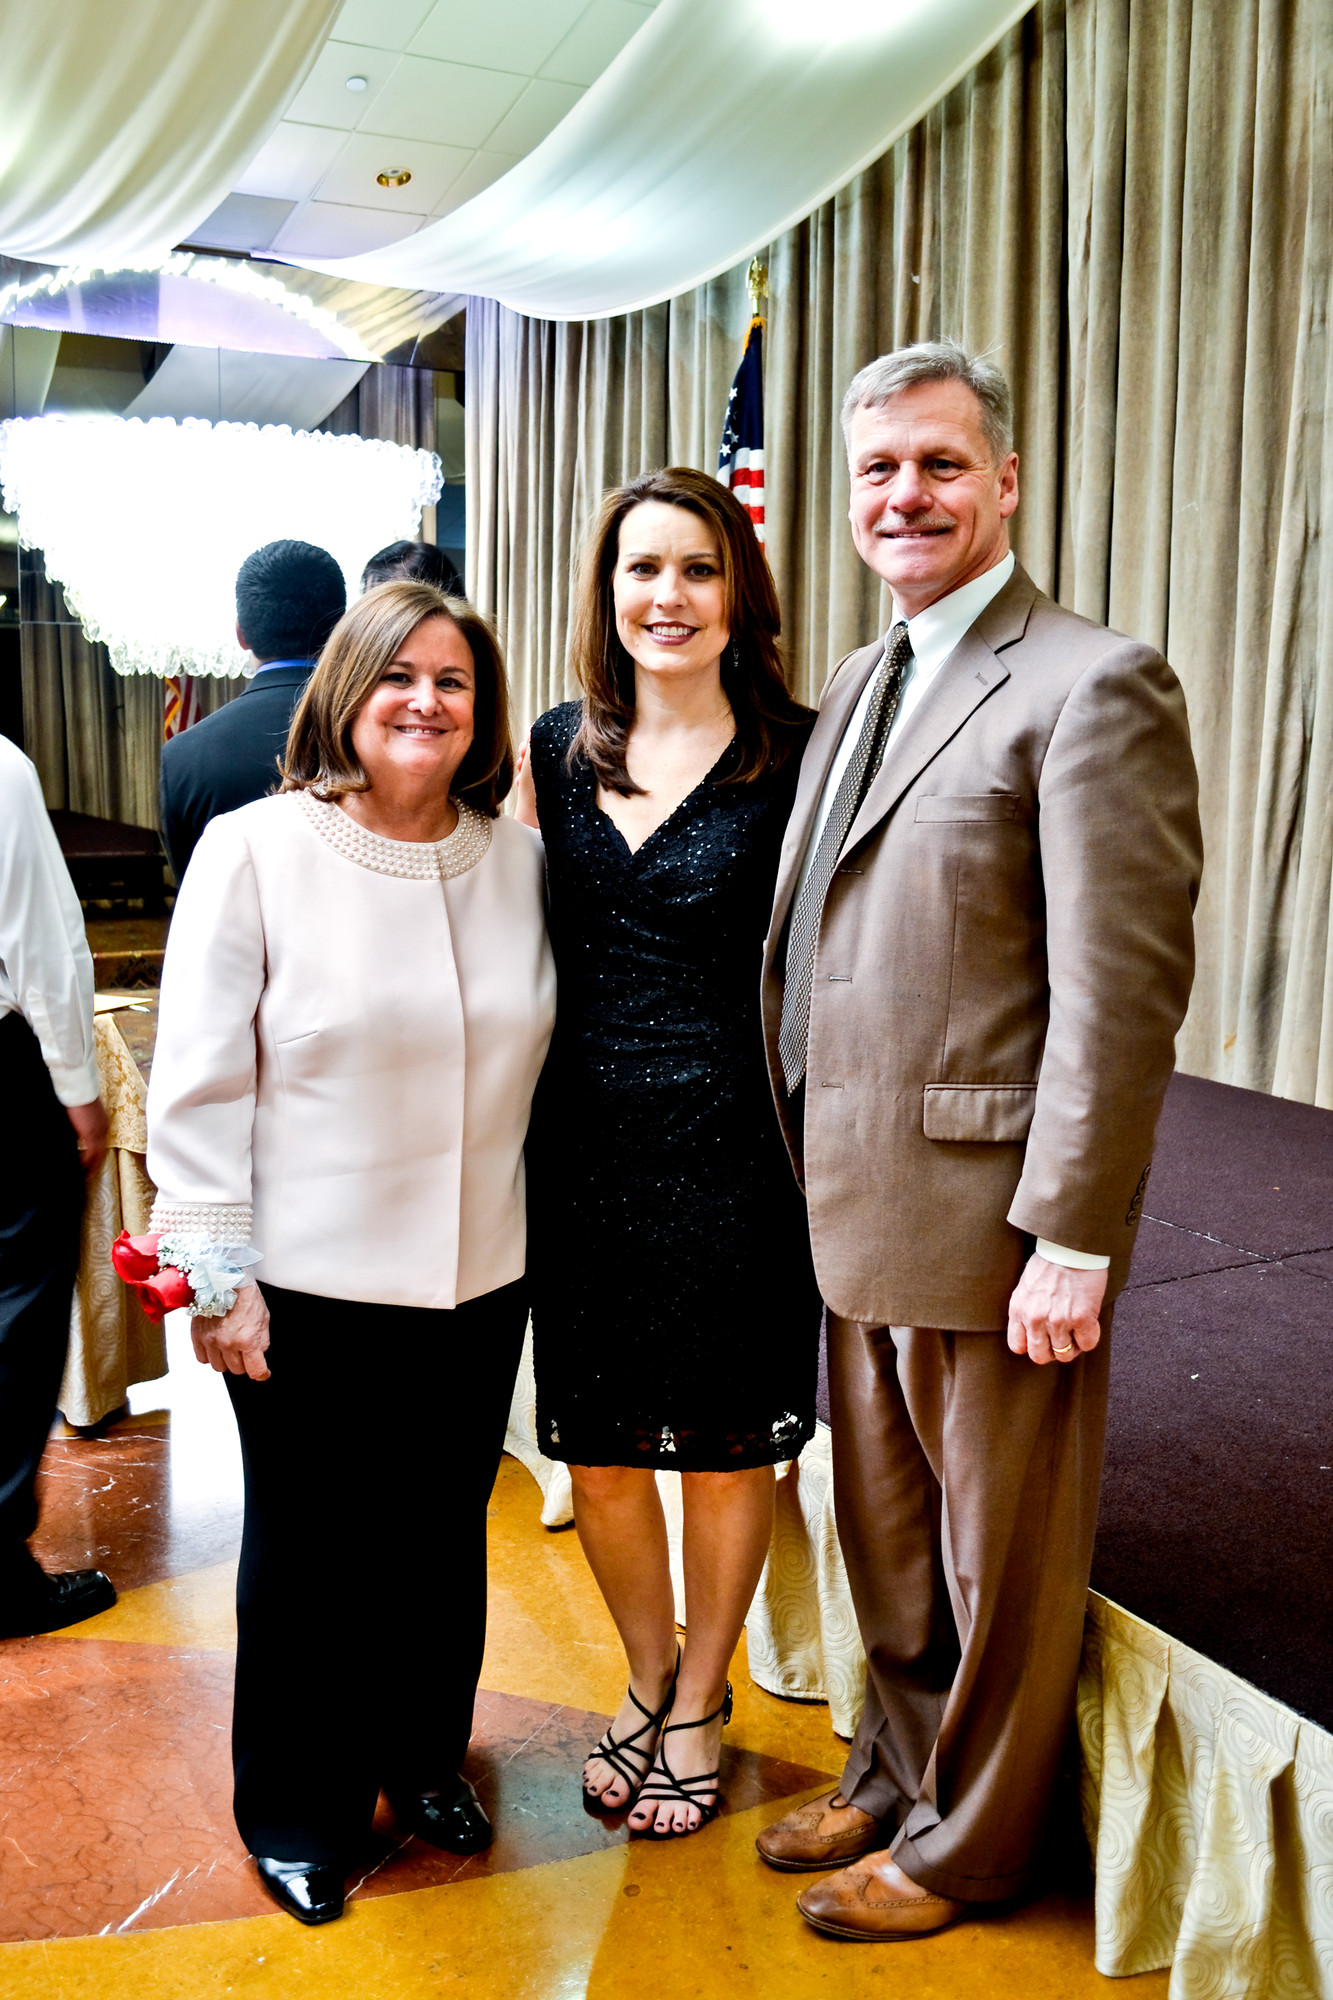 Honorees Abby Behr and James Lethbridge with PTA Council President Tracy Allred Pulice, at center.